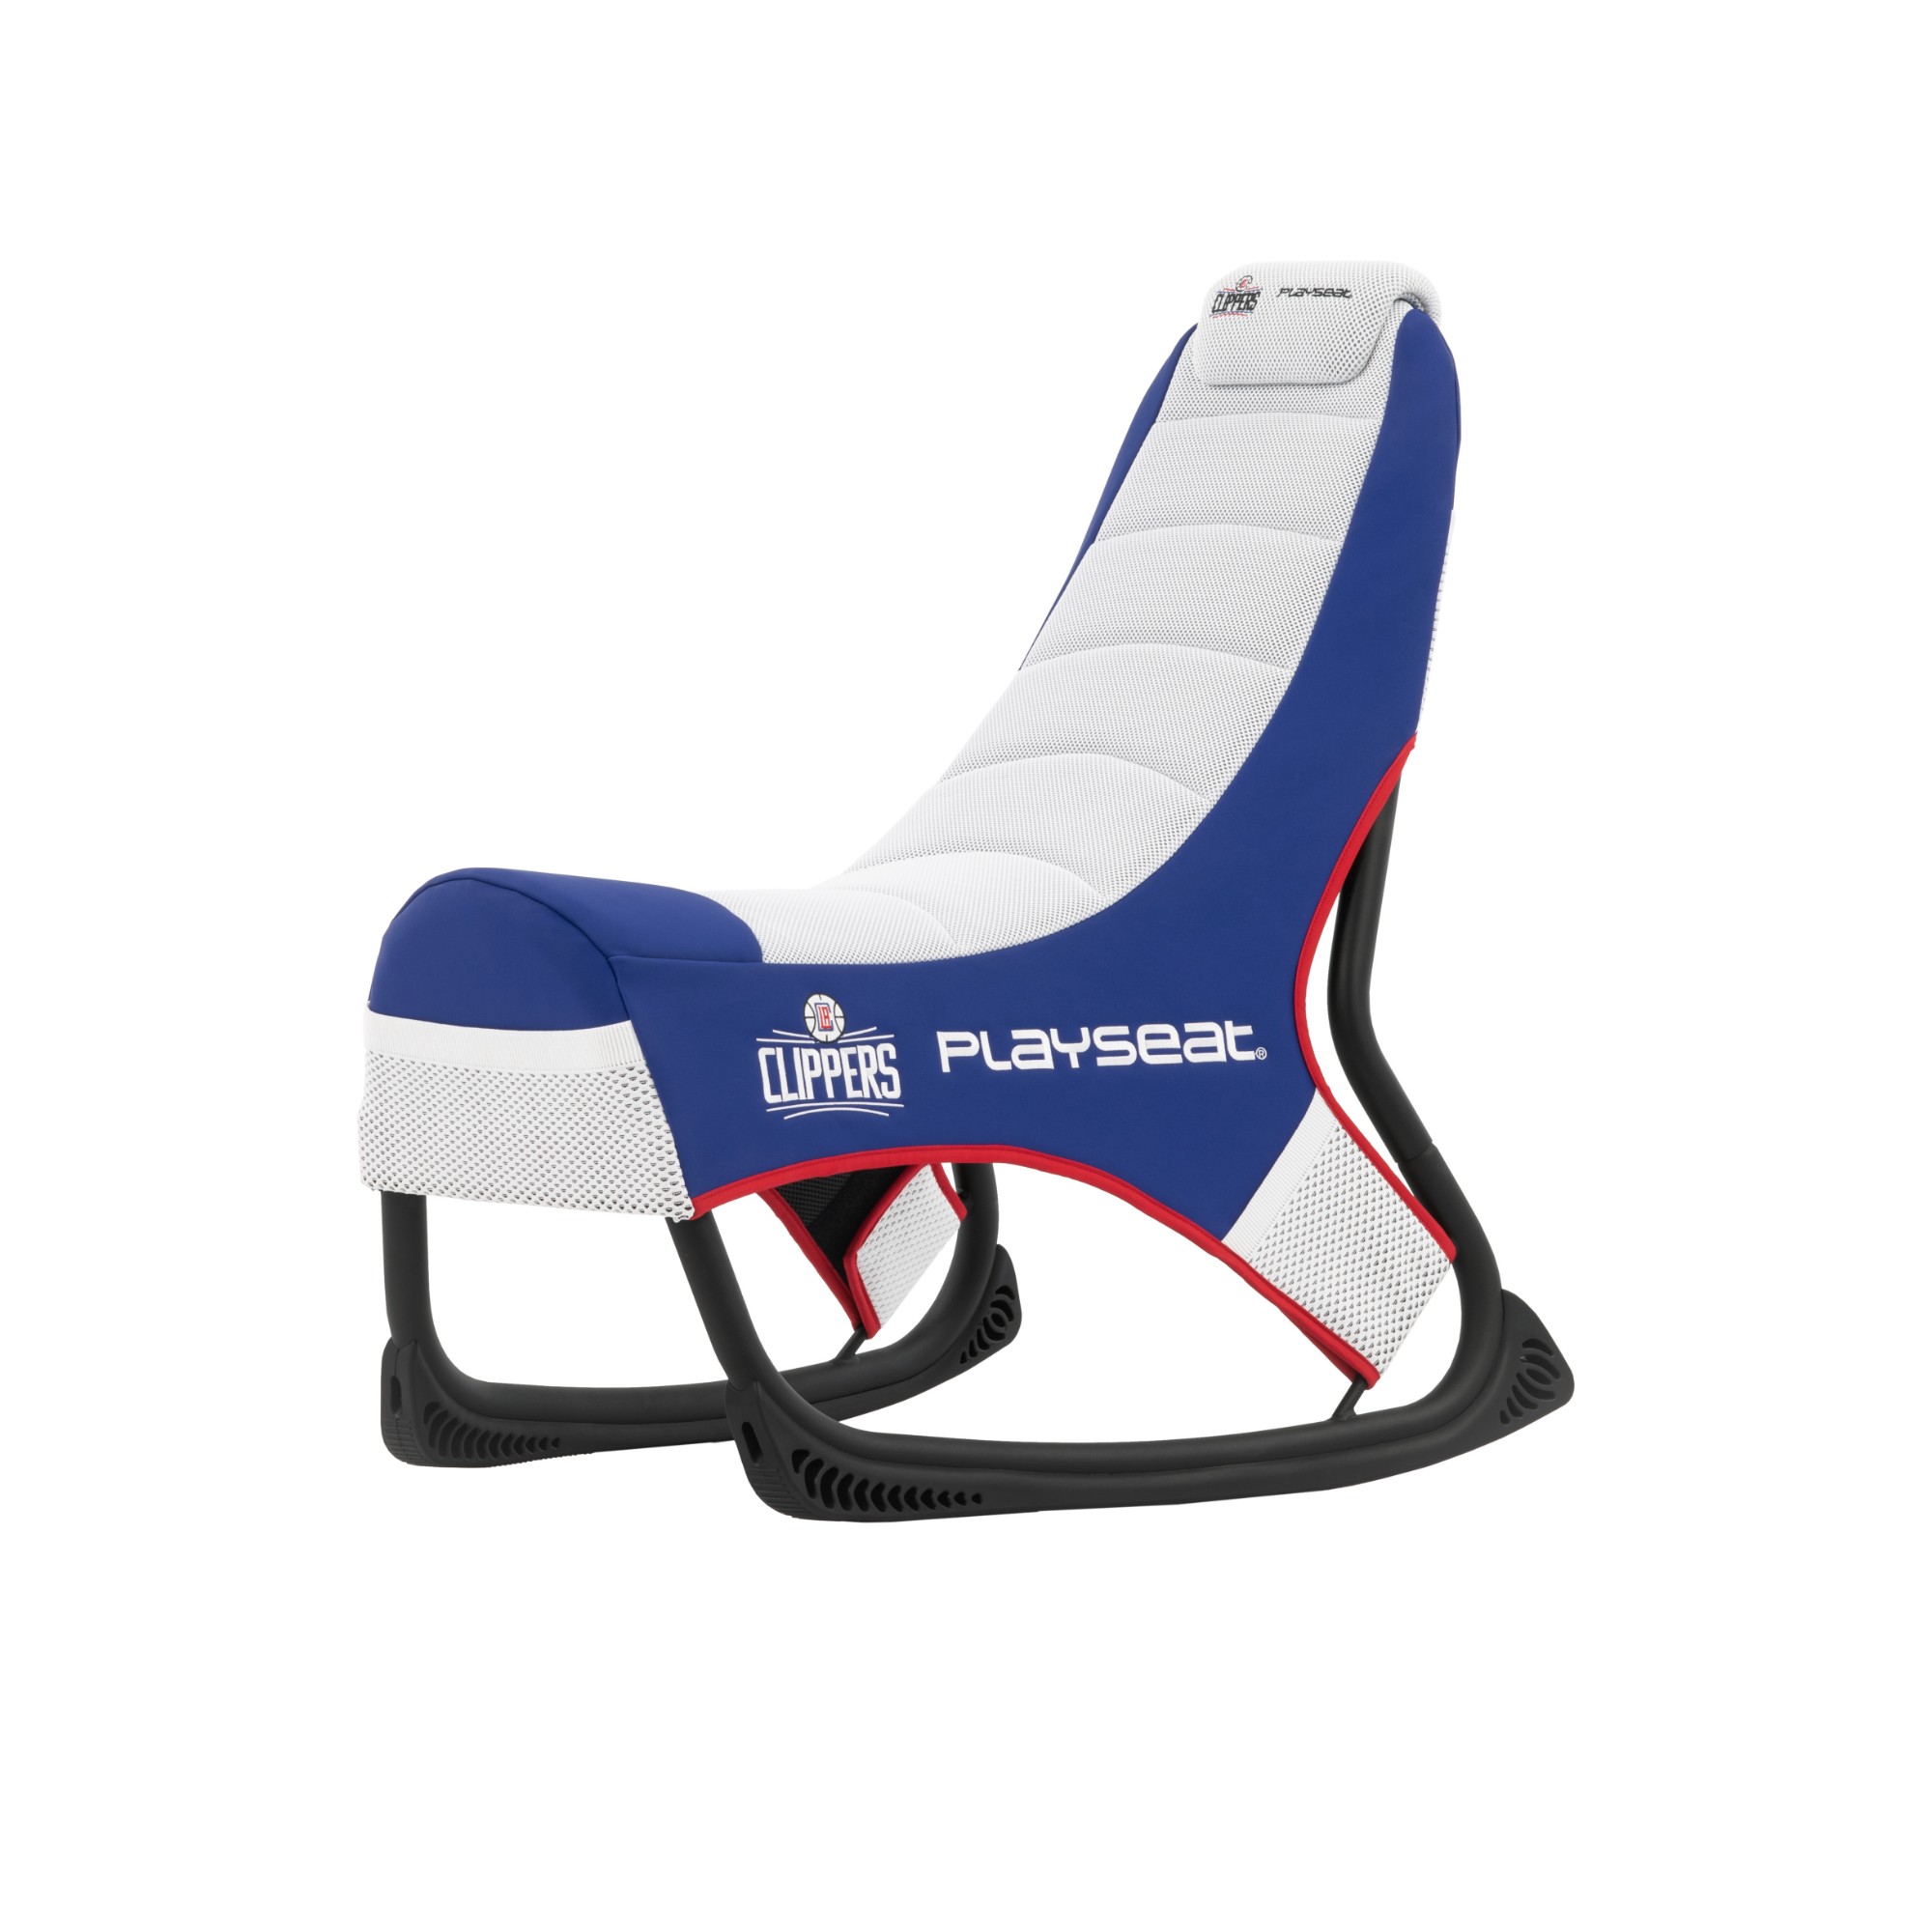 Photos - Computer Chair Playseat CHAMP NBA Console gaming chair Padded seat Blue, White NBA.00280 